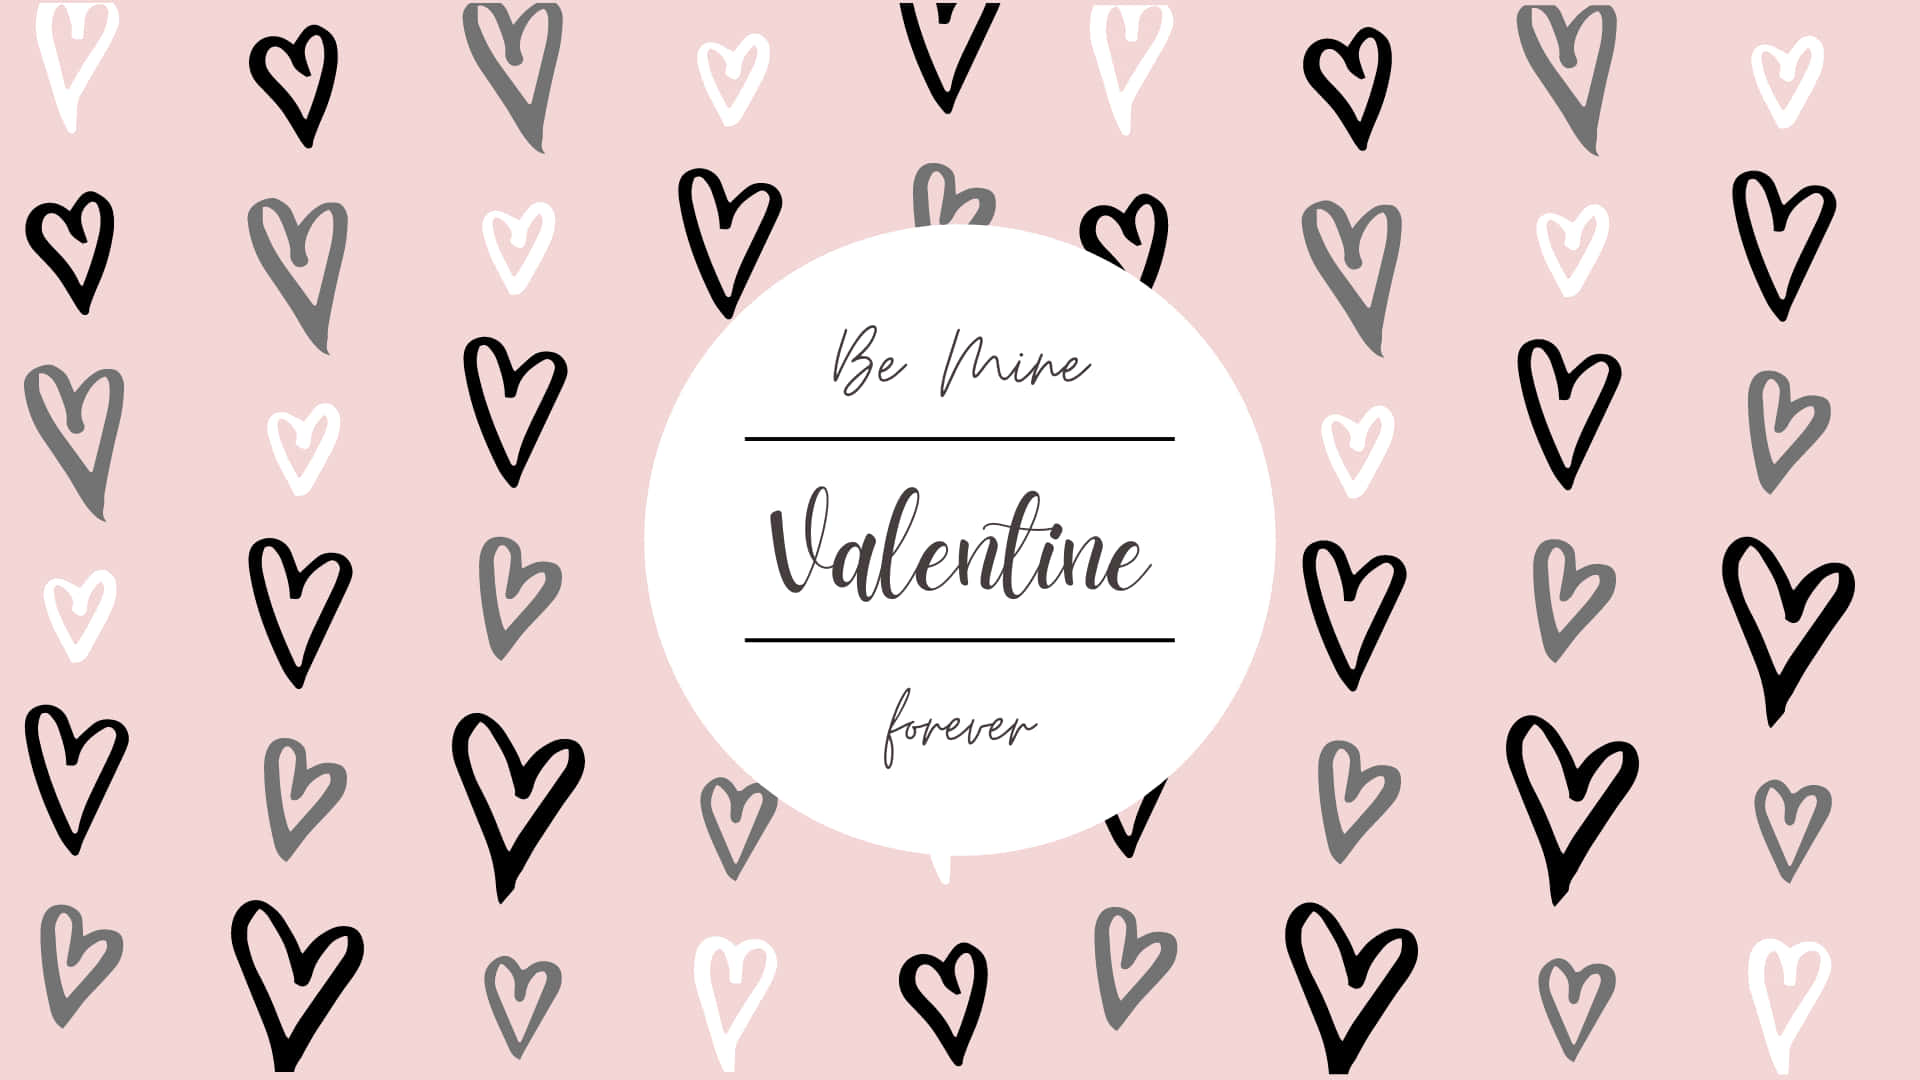 White Black And Gray Hearts Valentines Day Background